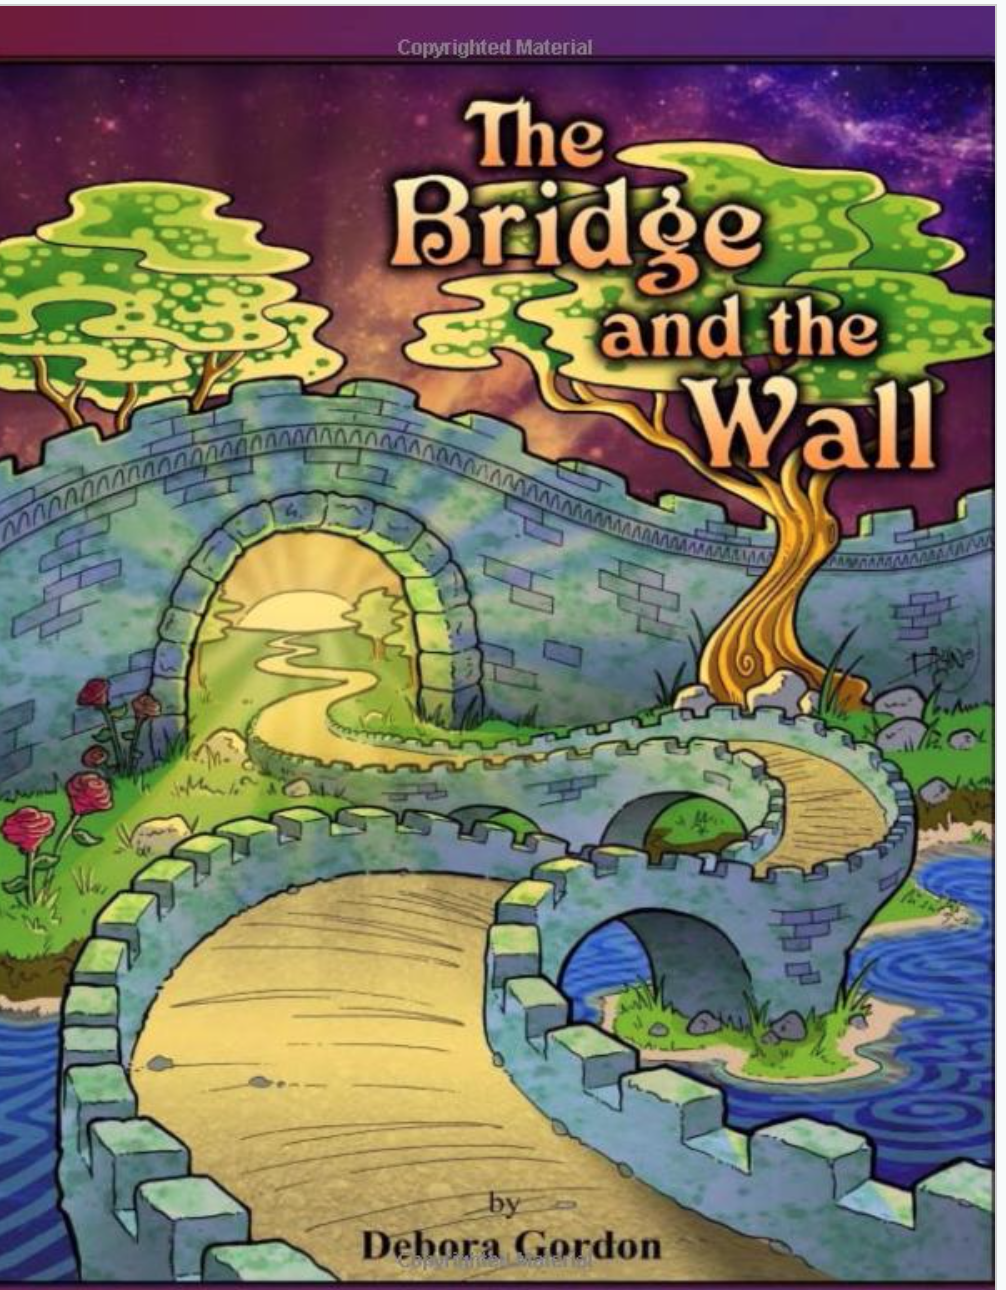 The Bridge and the Wall book cover